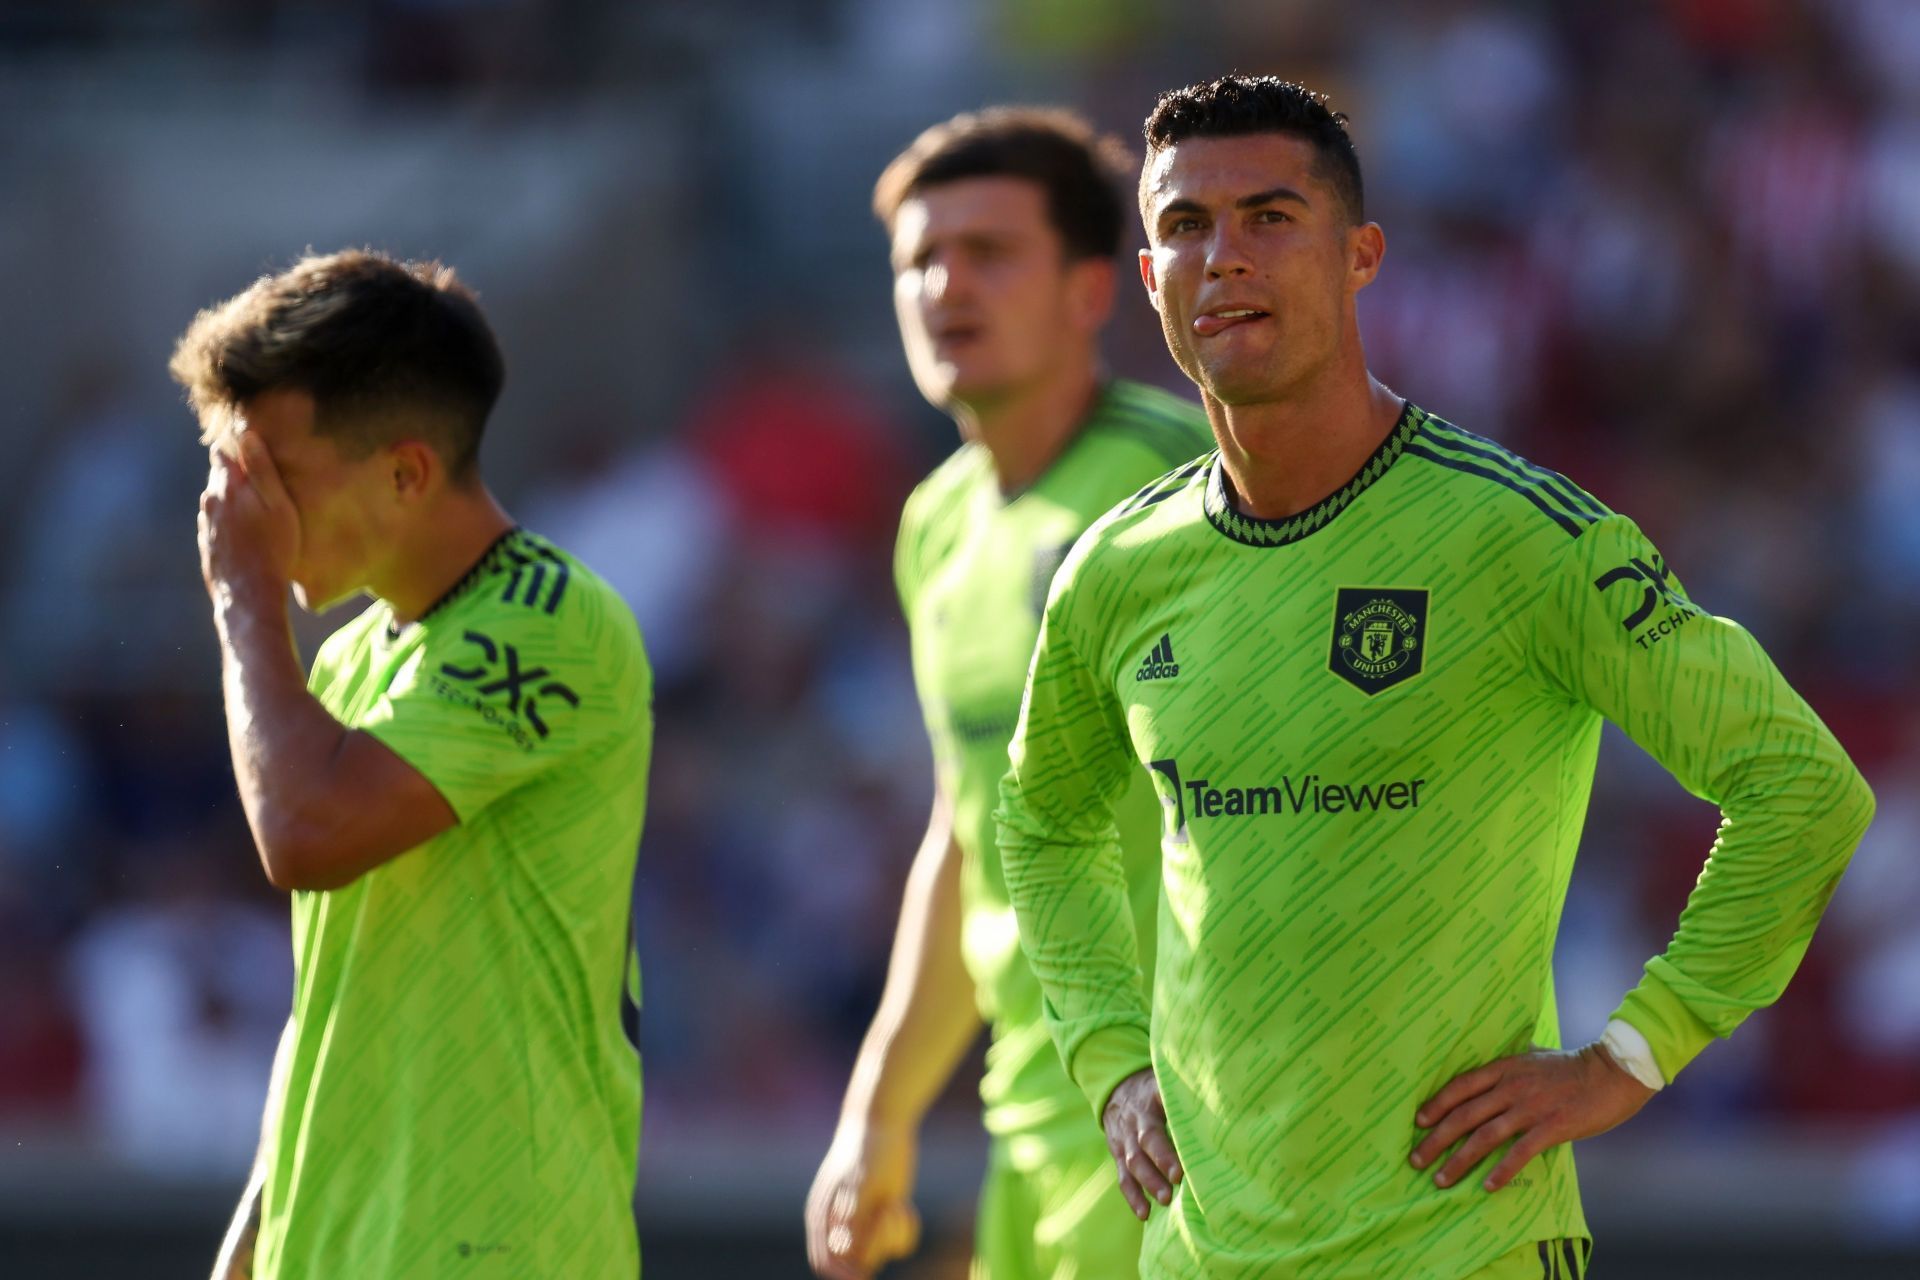 Cristiano Ronaldo started his first game of the season against Brentford.